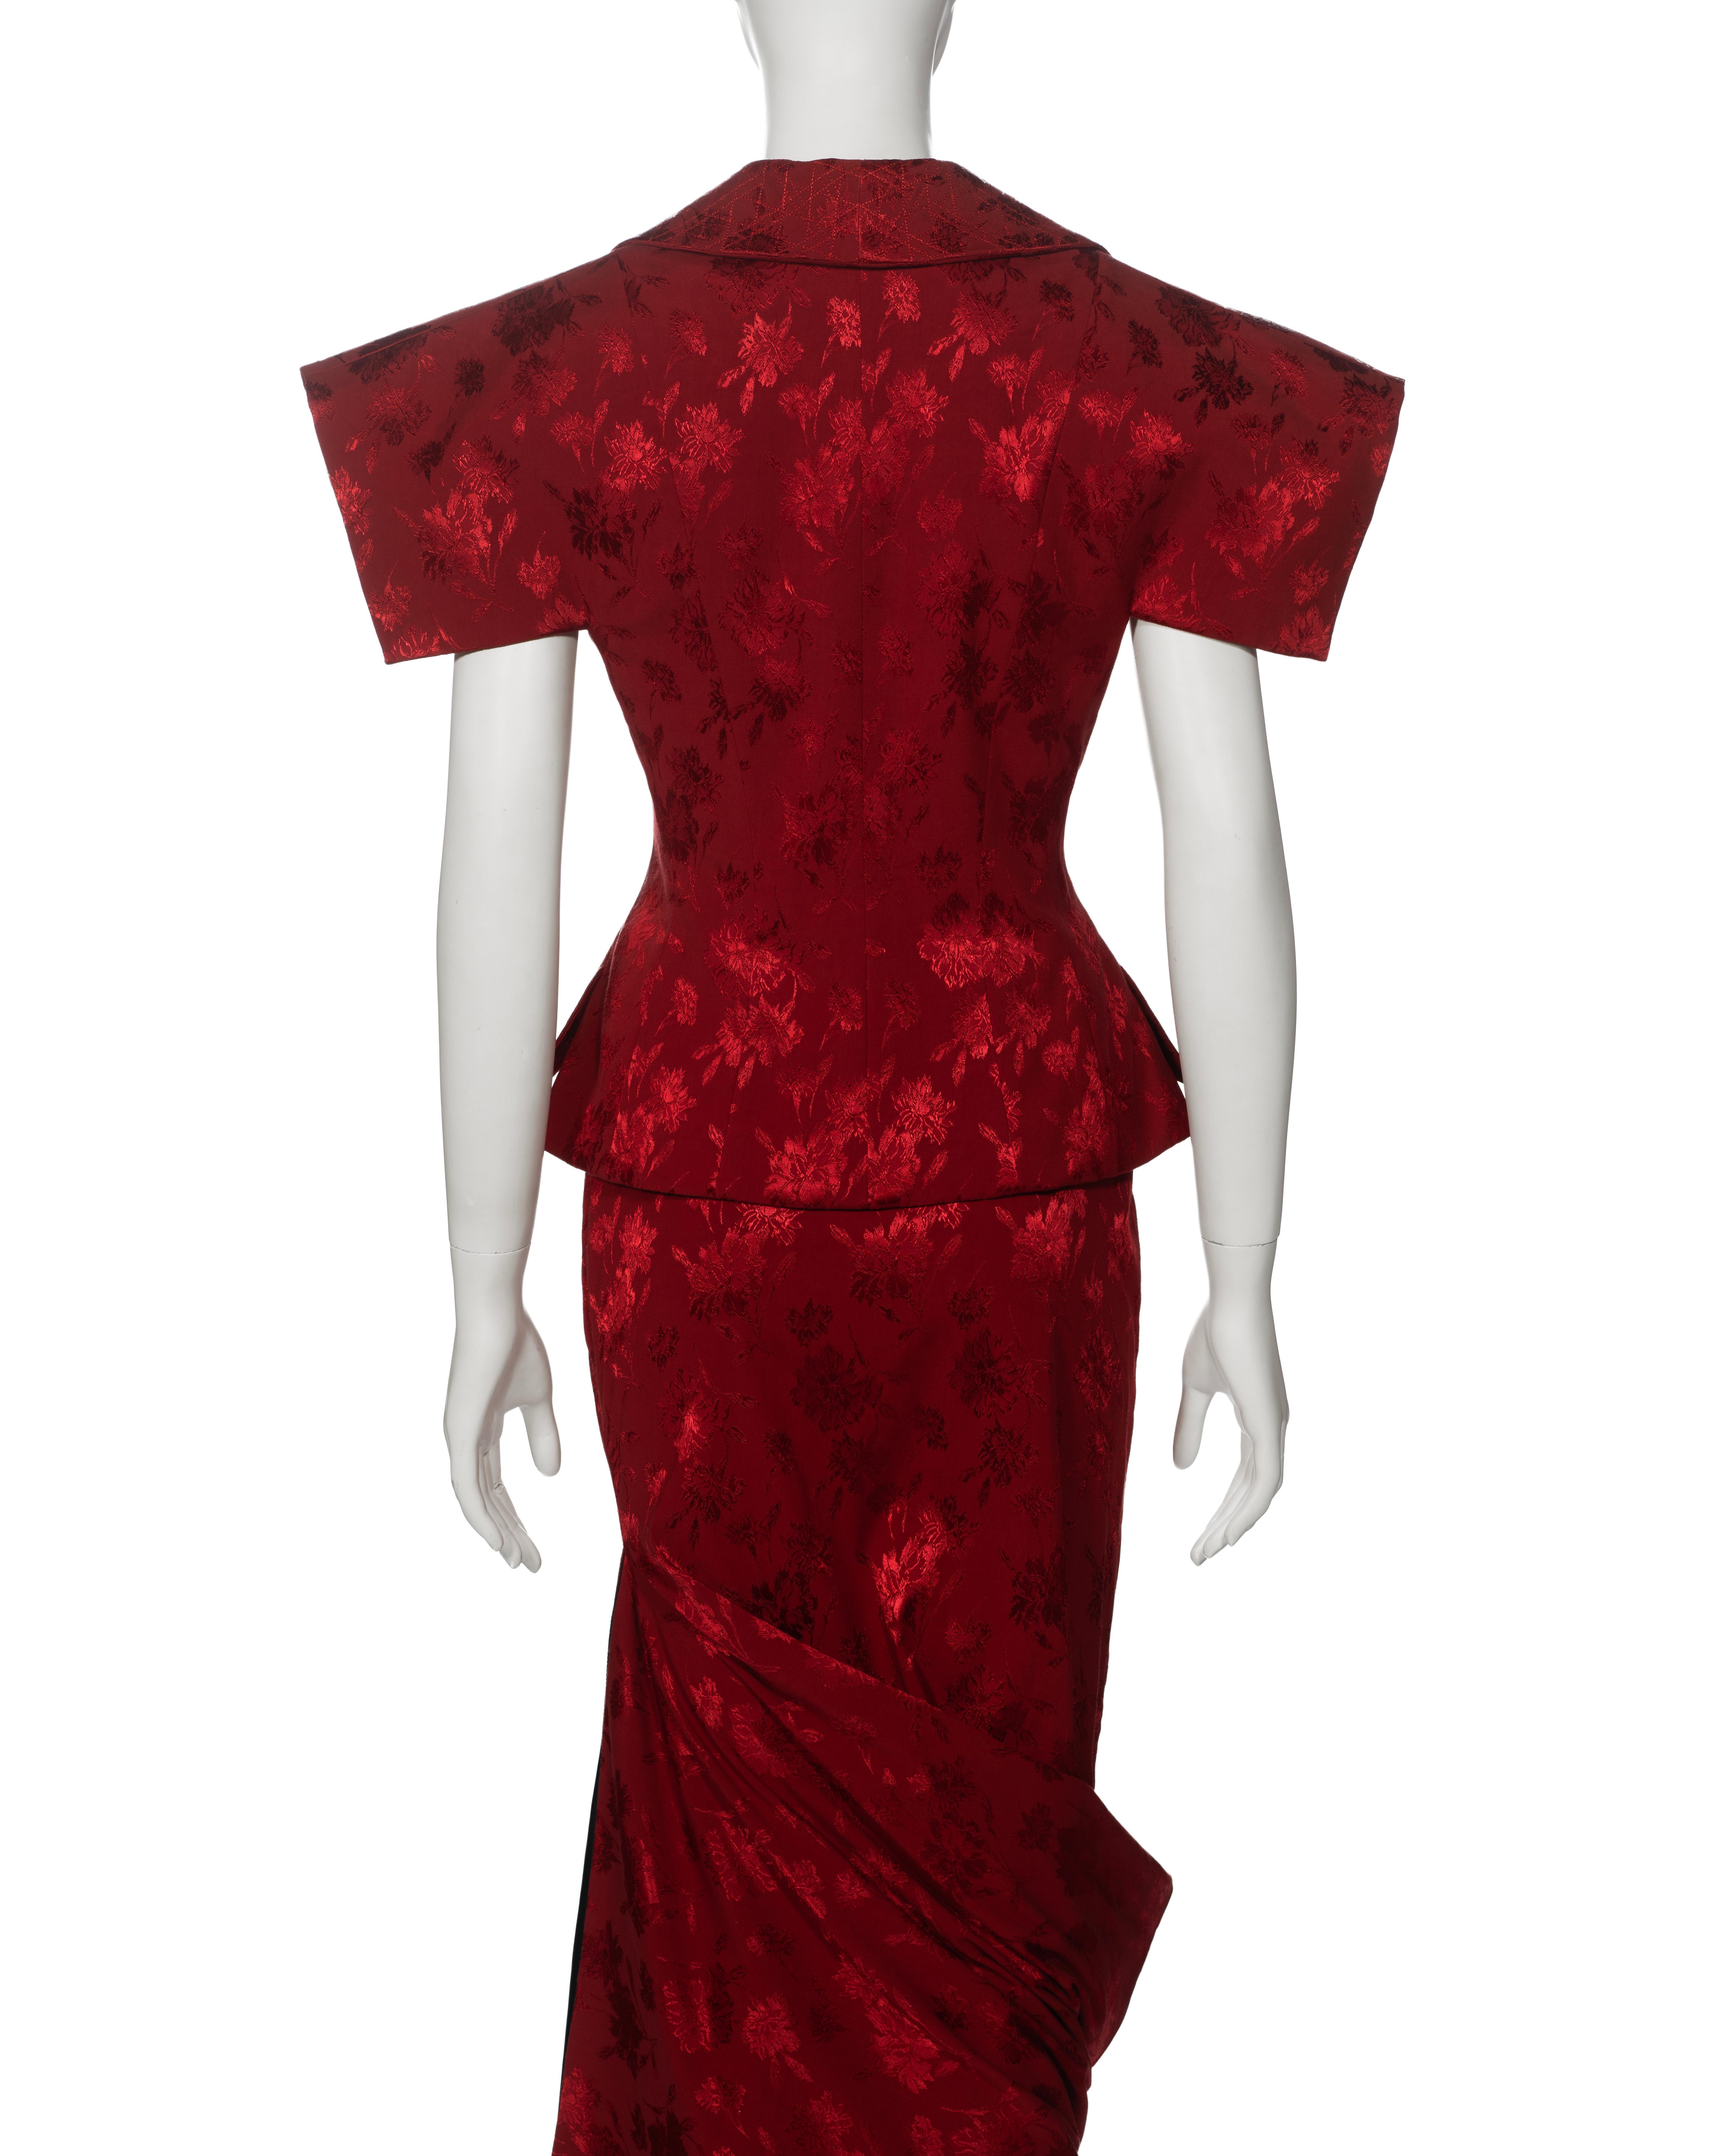 Christian Dior by John Galliano Red Floral Damask Evening Ensemble, fw 1997 11